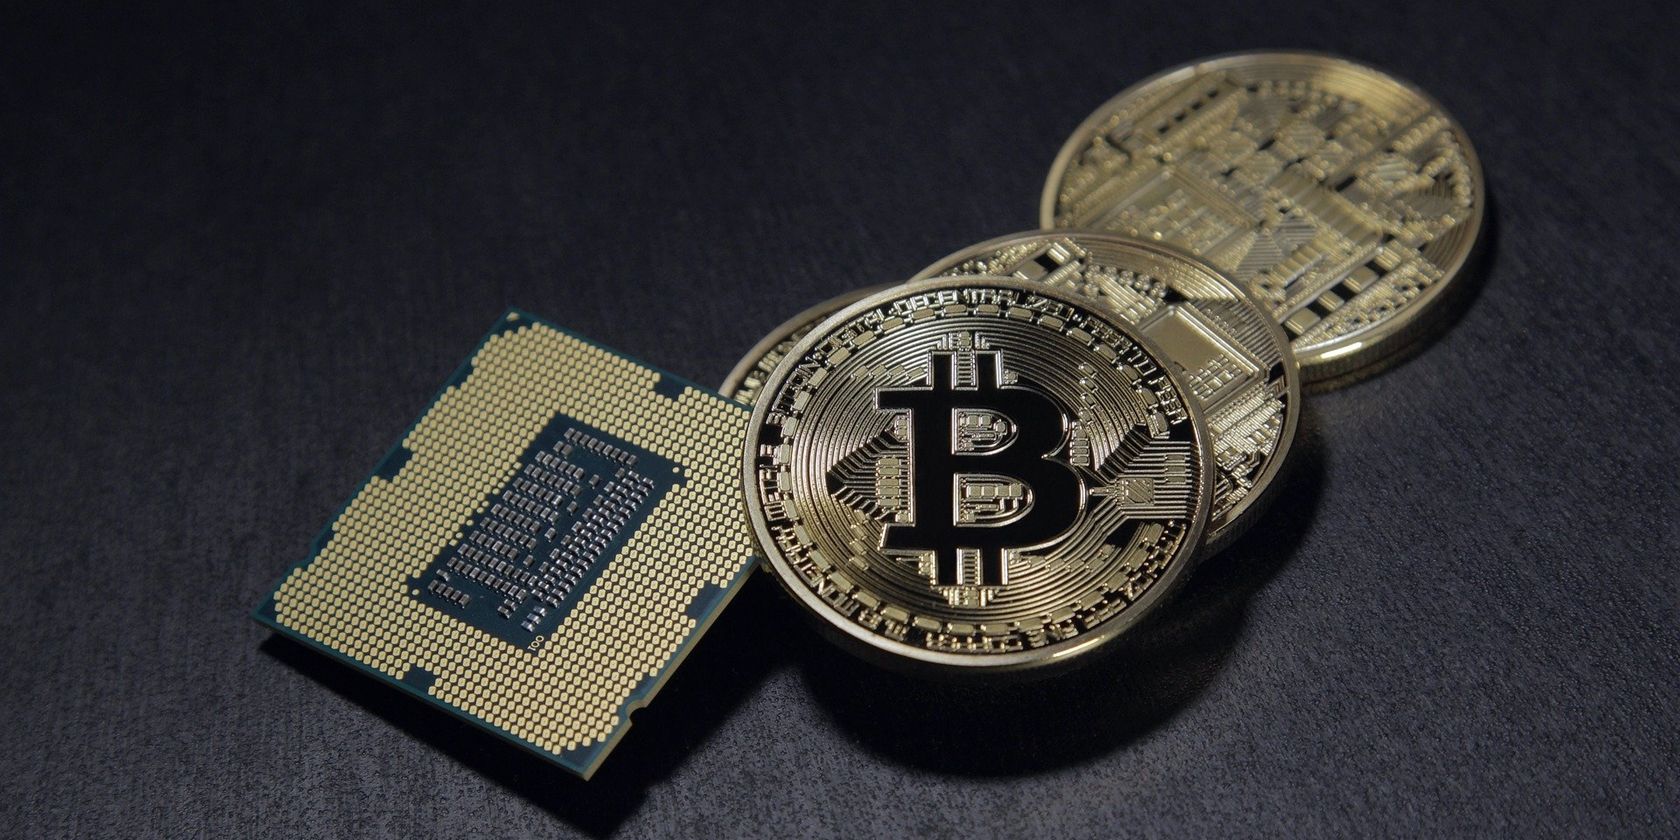 Image of crypto coins and a chip.